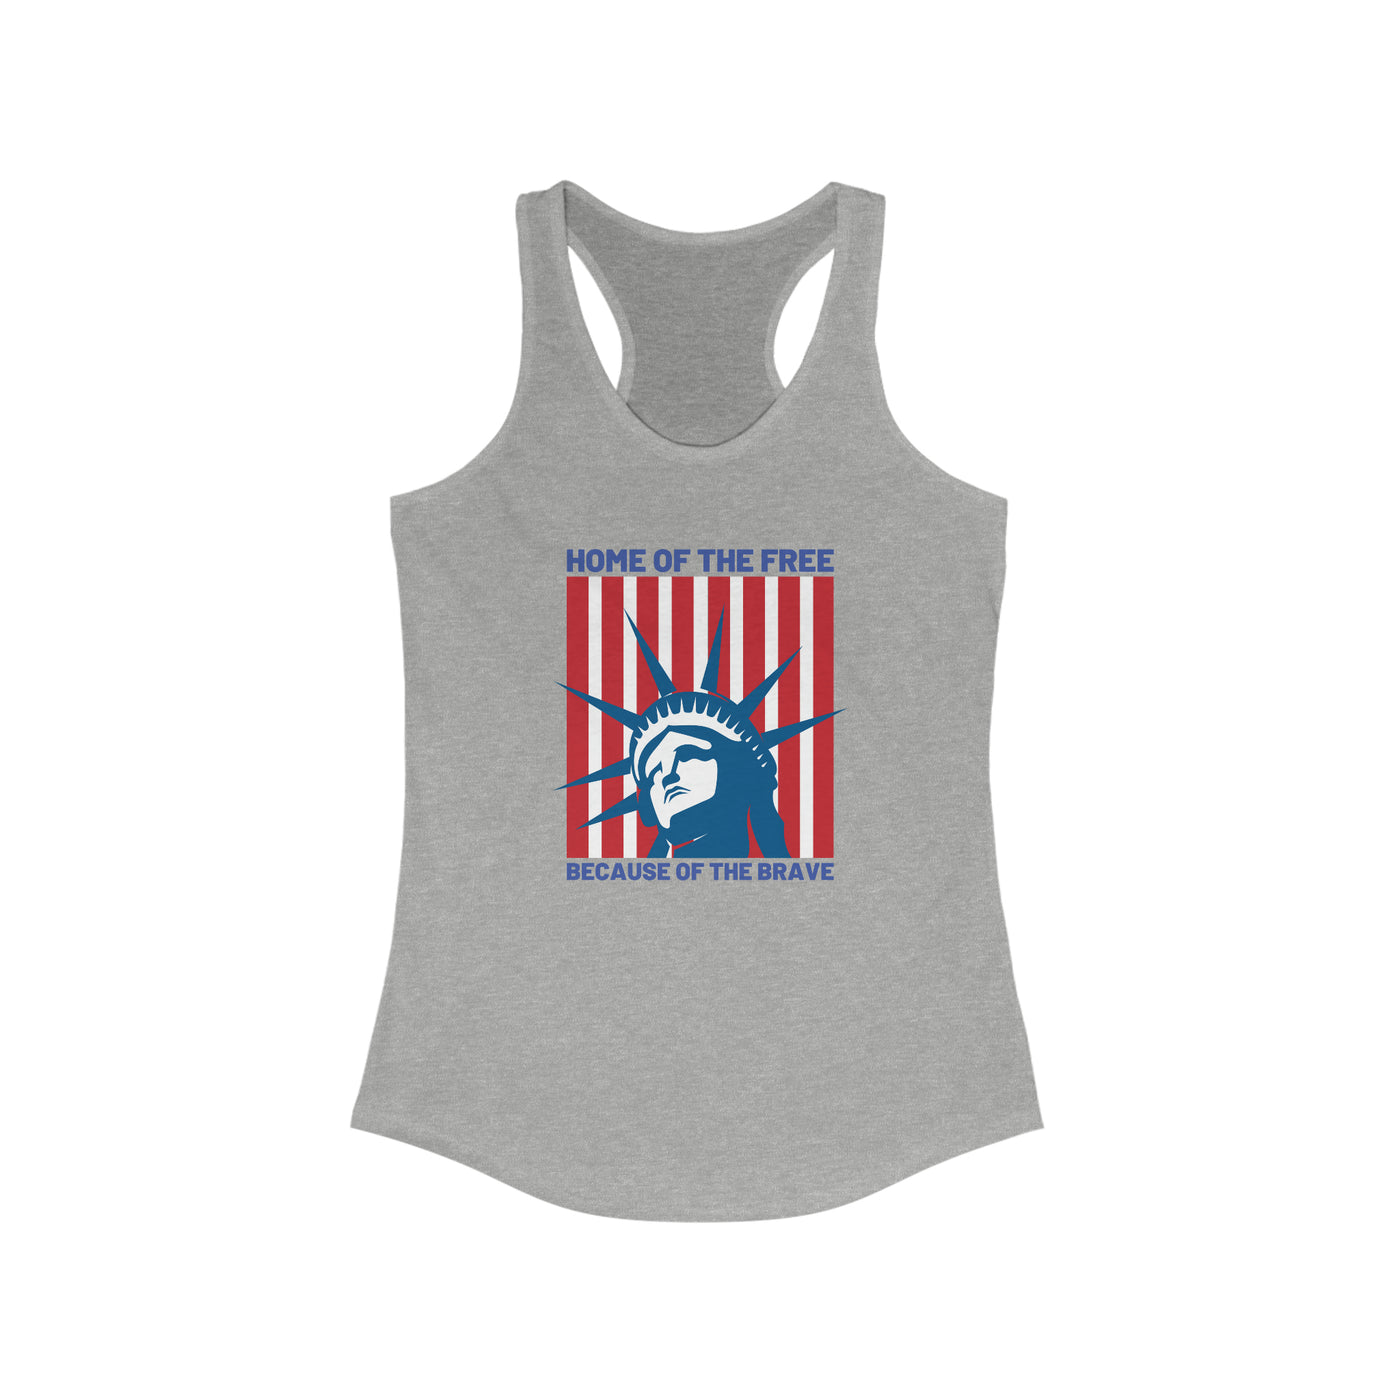 Home Of The Free Because Of The Brave Women's Racerback Tank